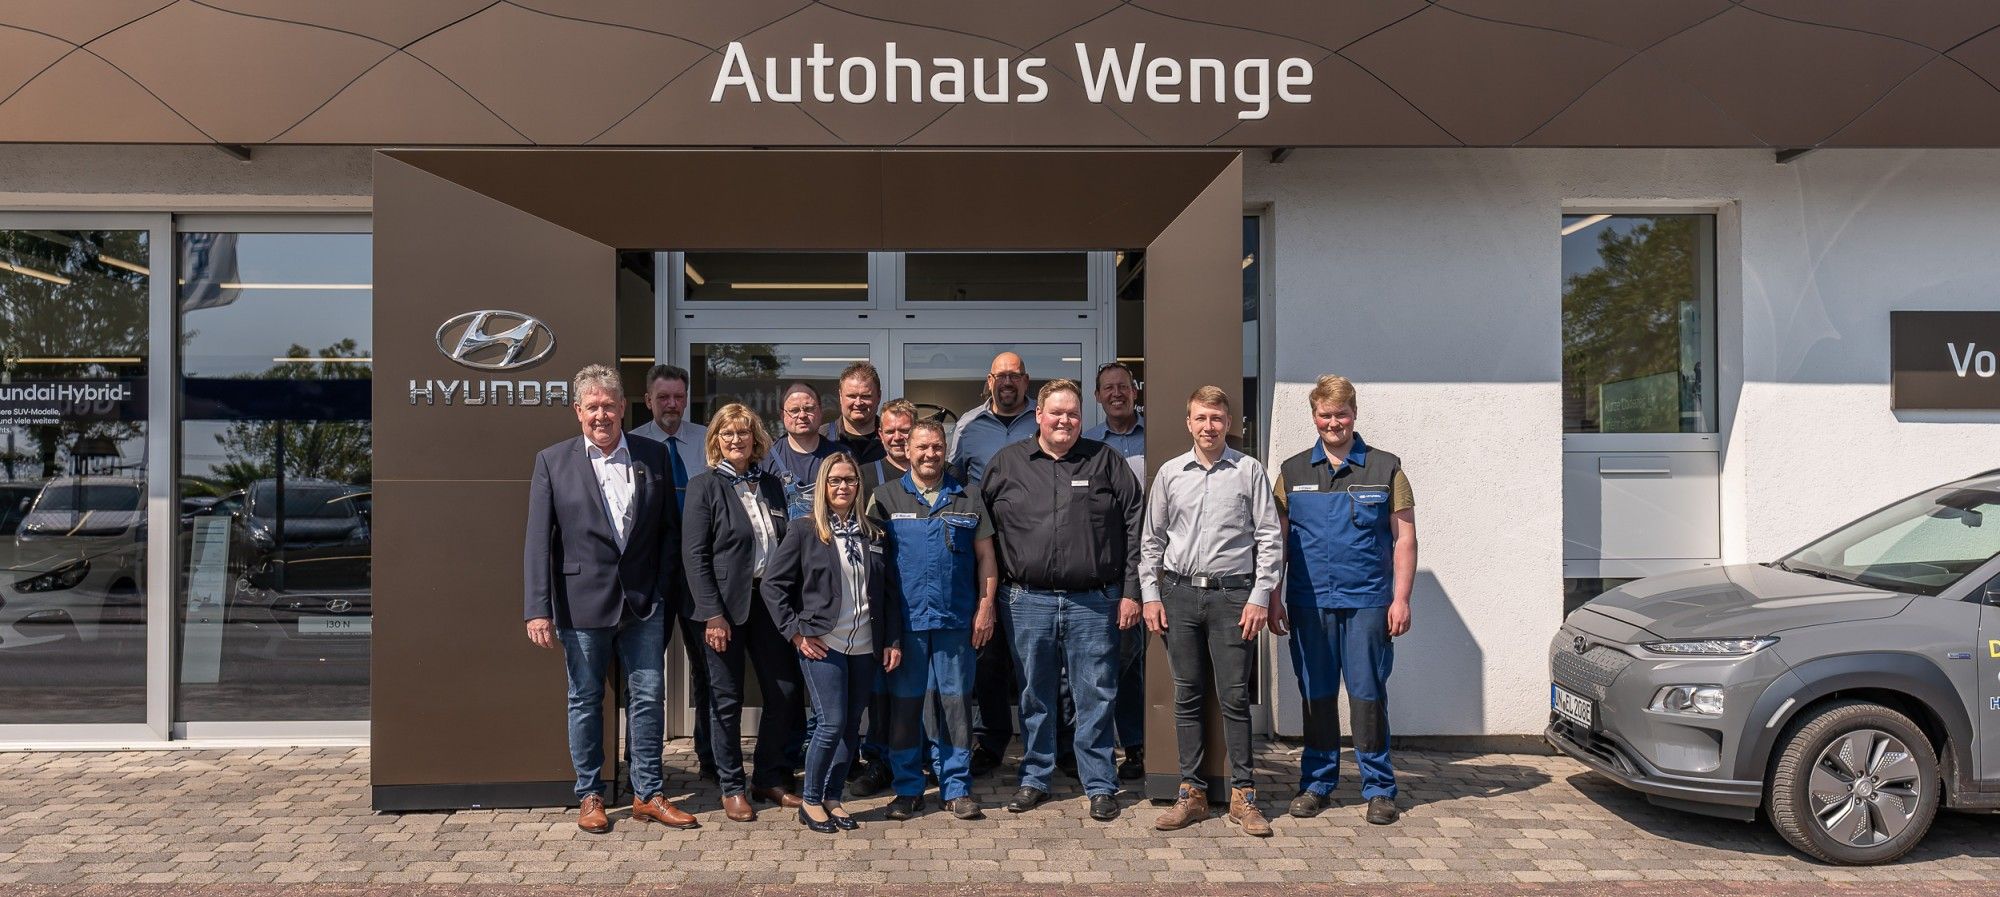 Autohaus Wenge - Selm - Autohaus Wenge in Selm Bork - Unser Team